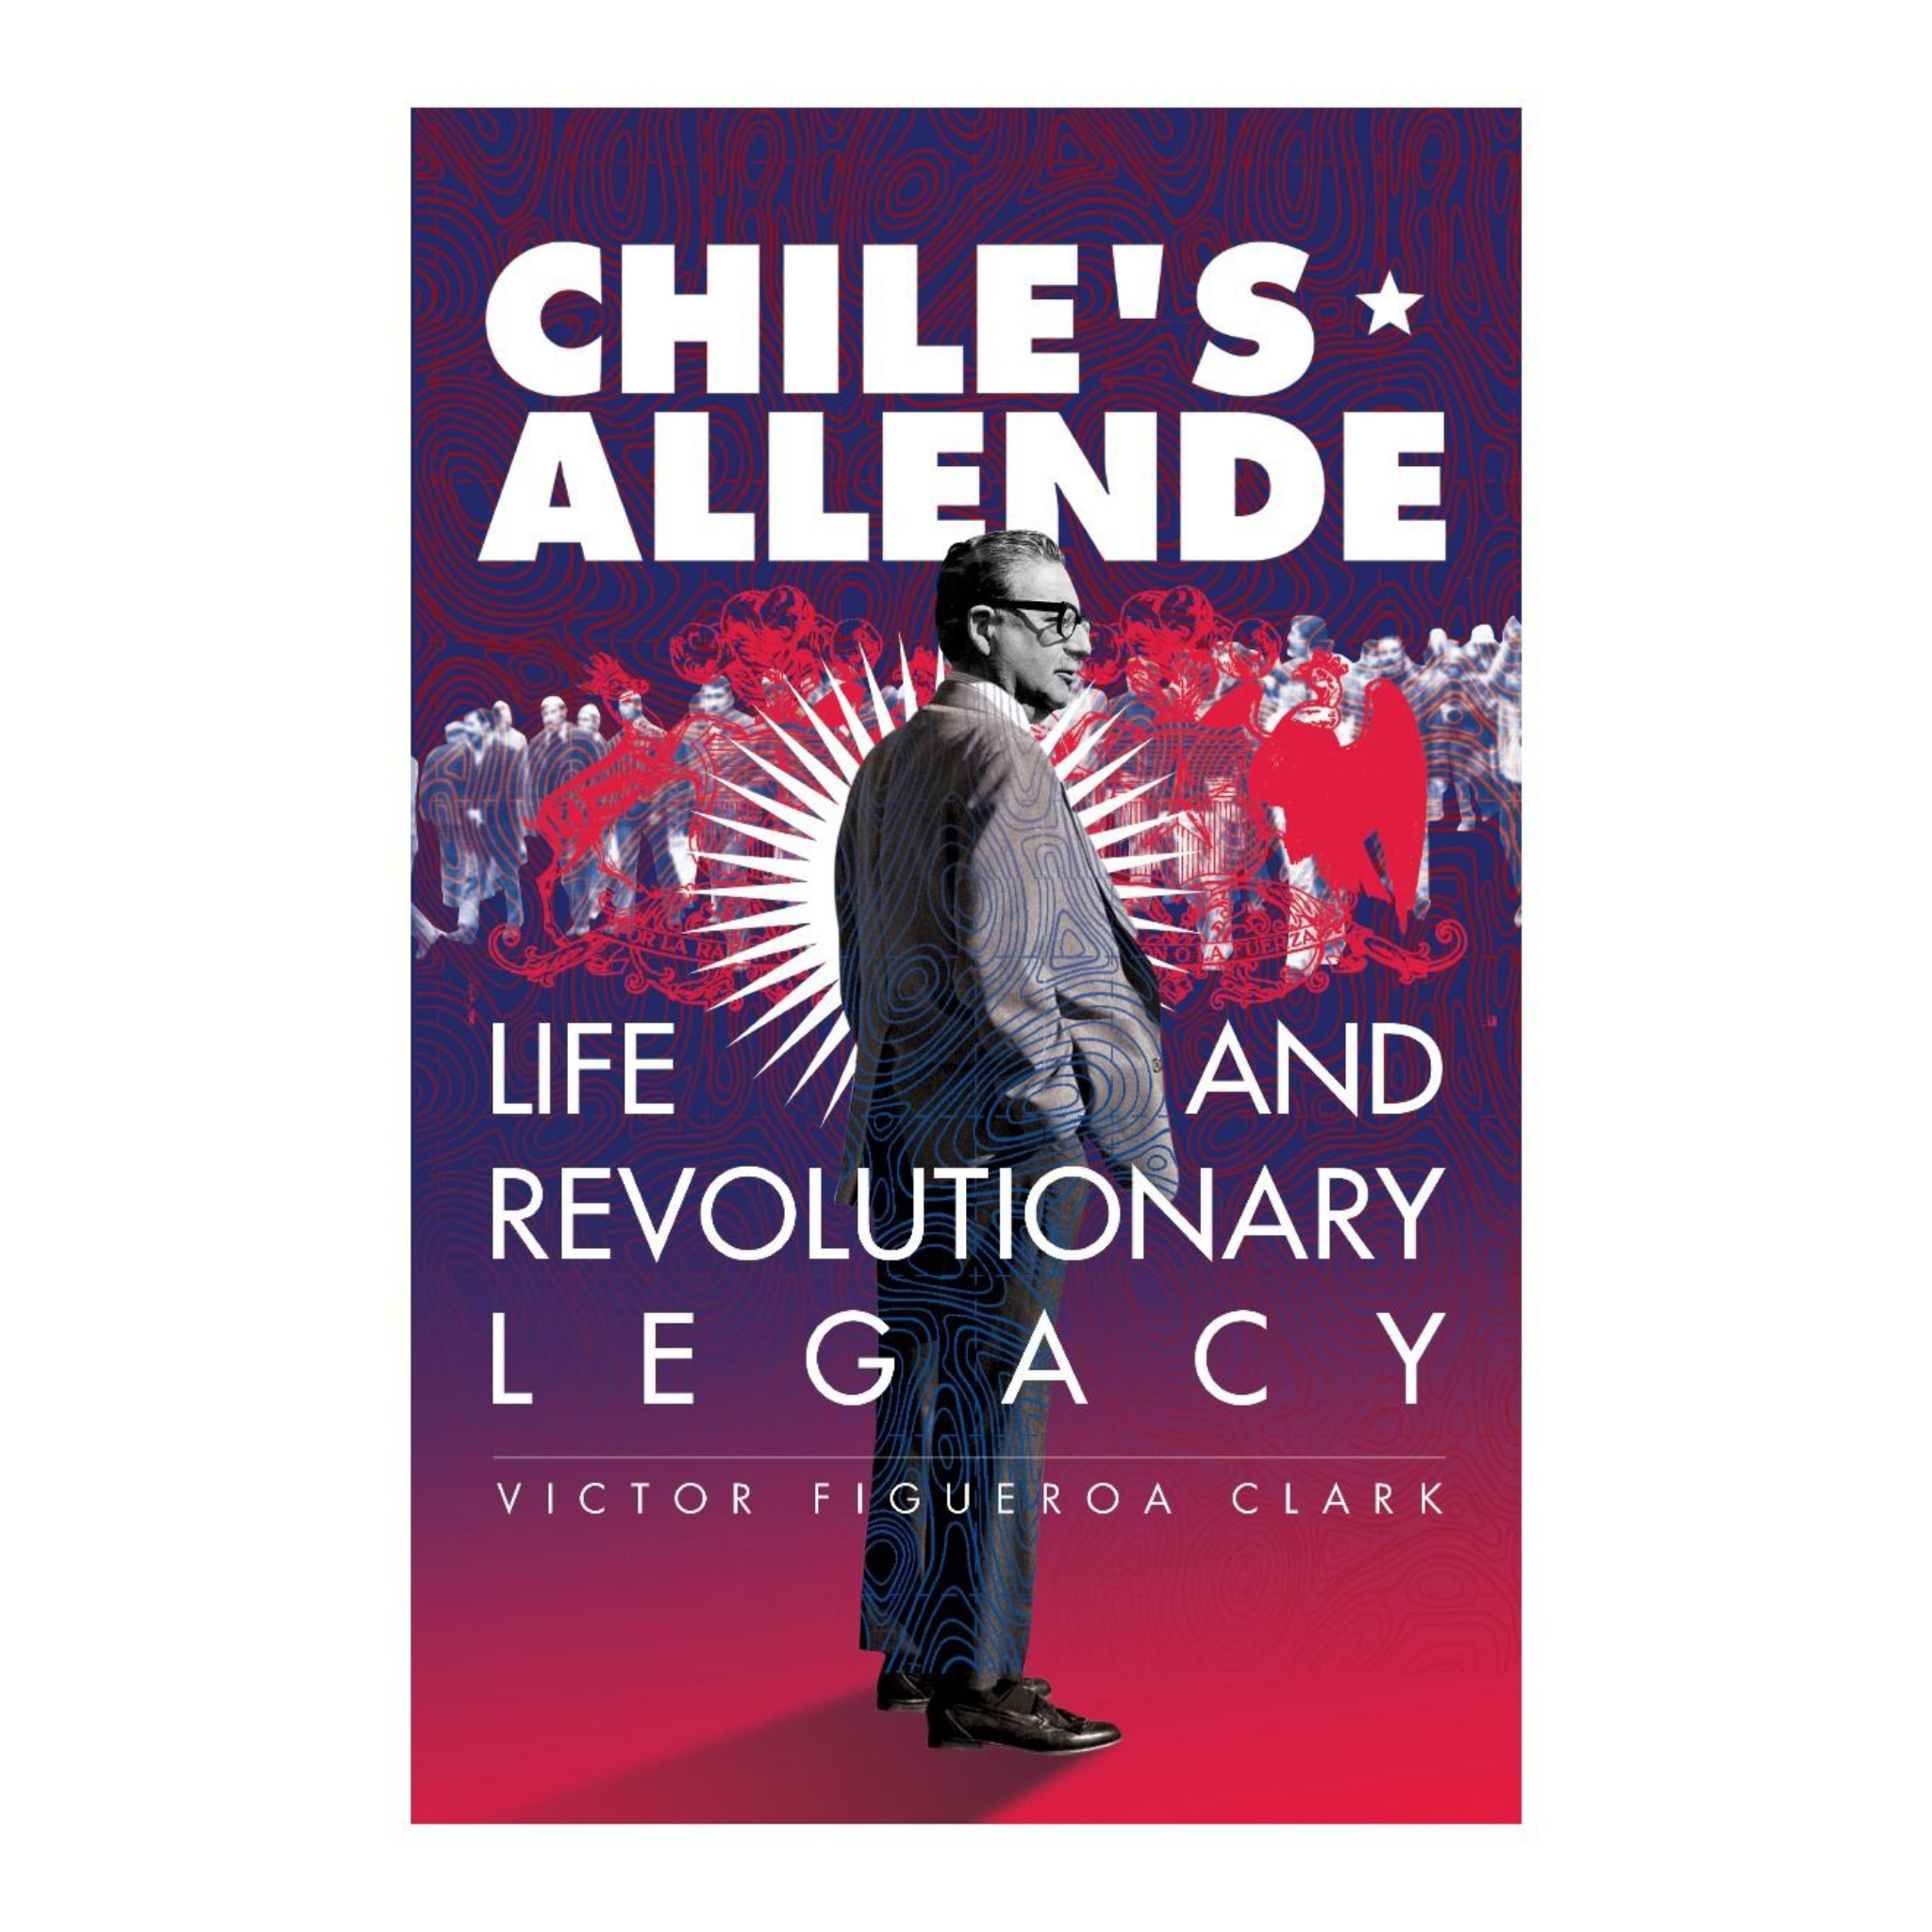 Chile's Allende: Life and Revolutionary Legacy